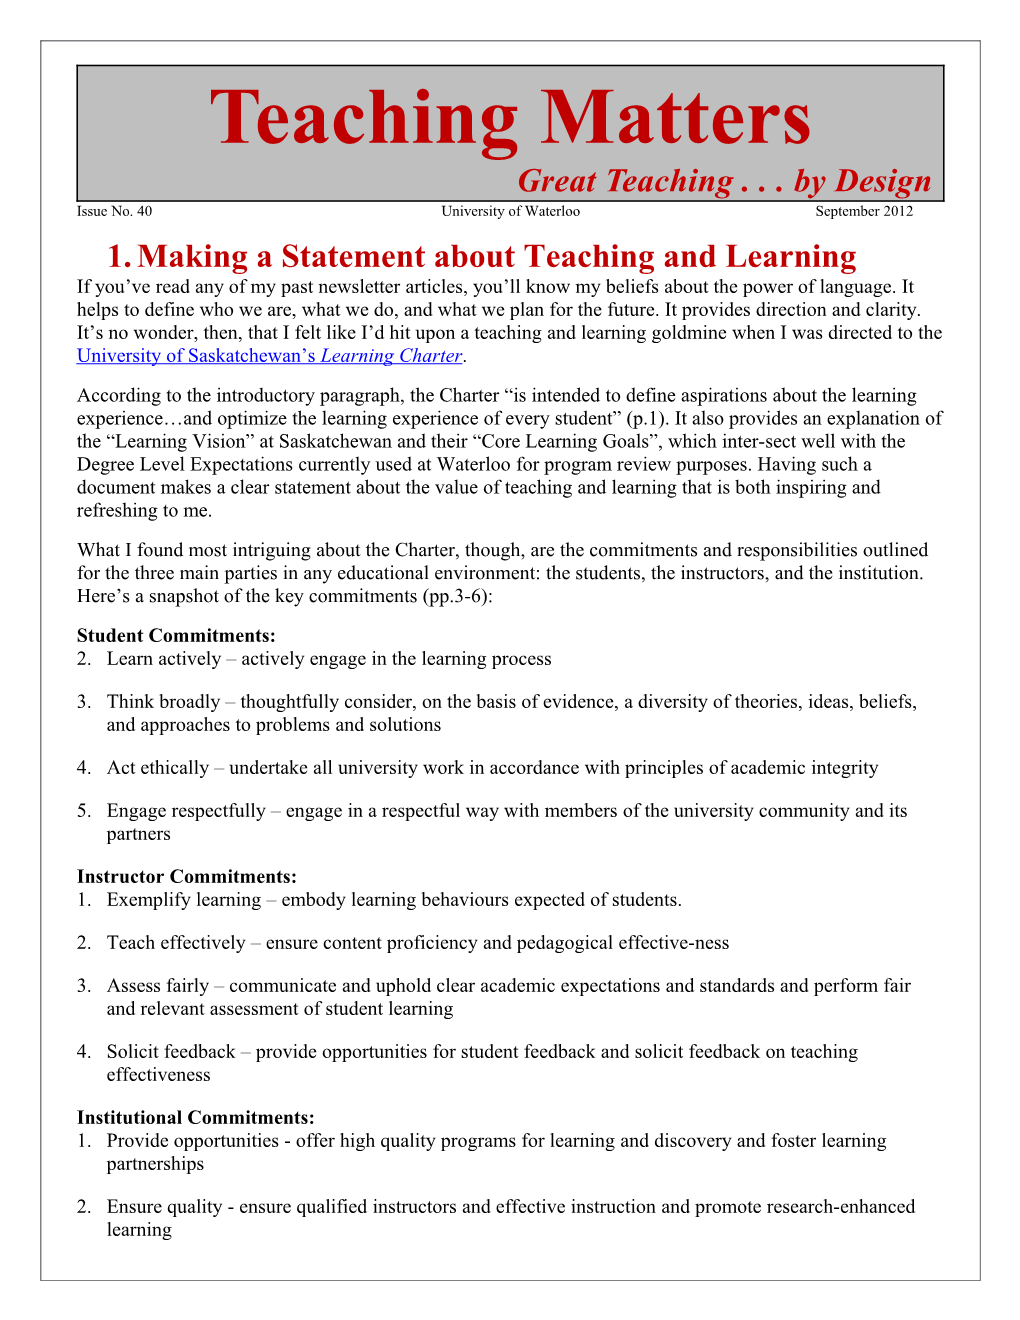 Making a Statement About Teaching and Learning